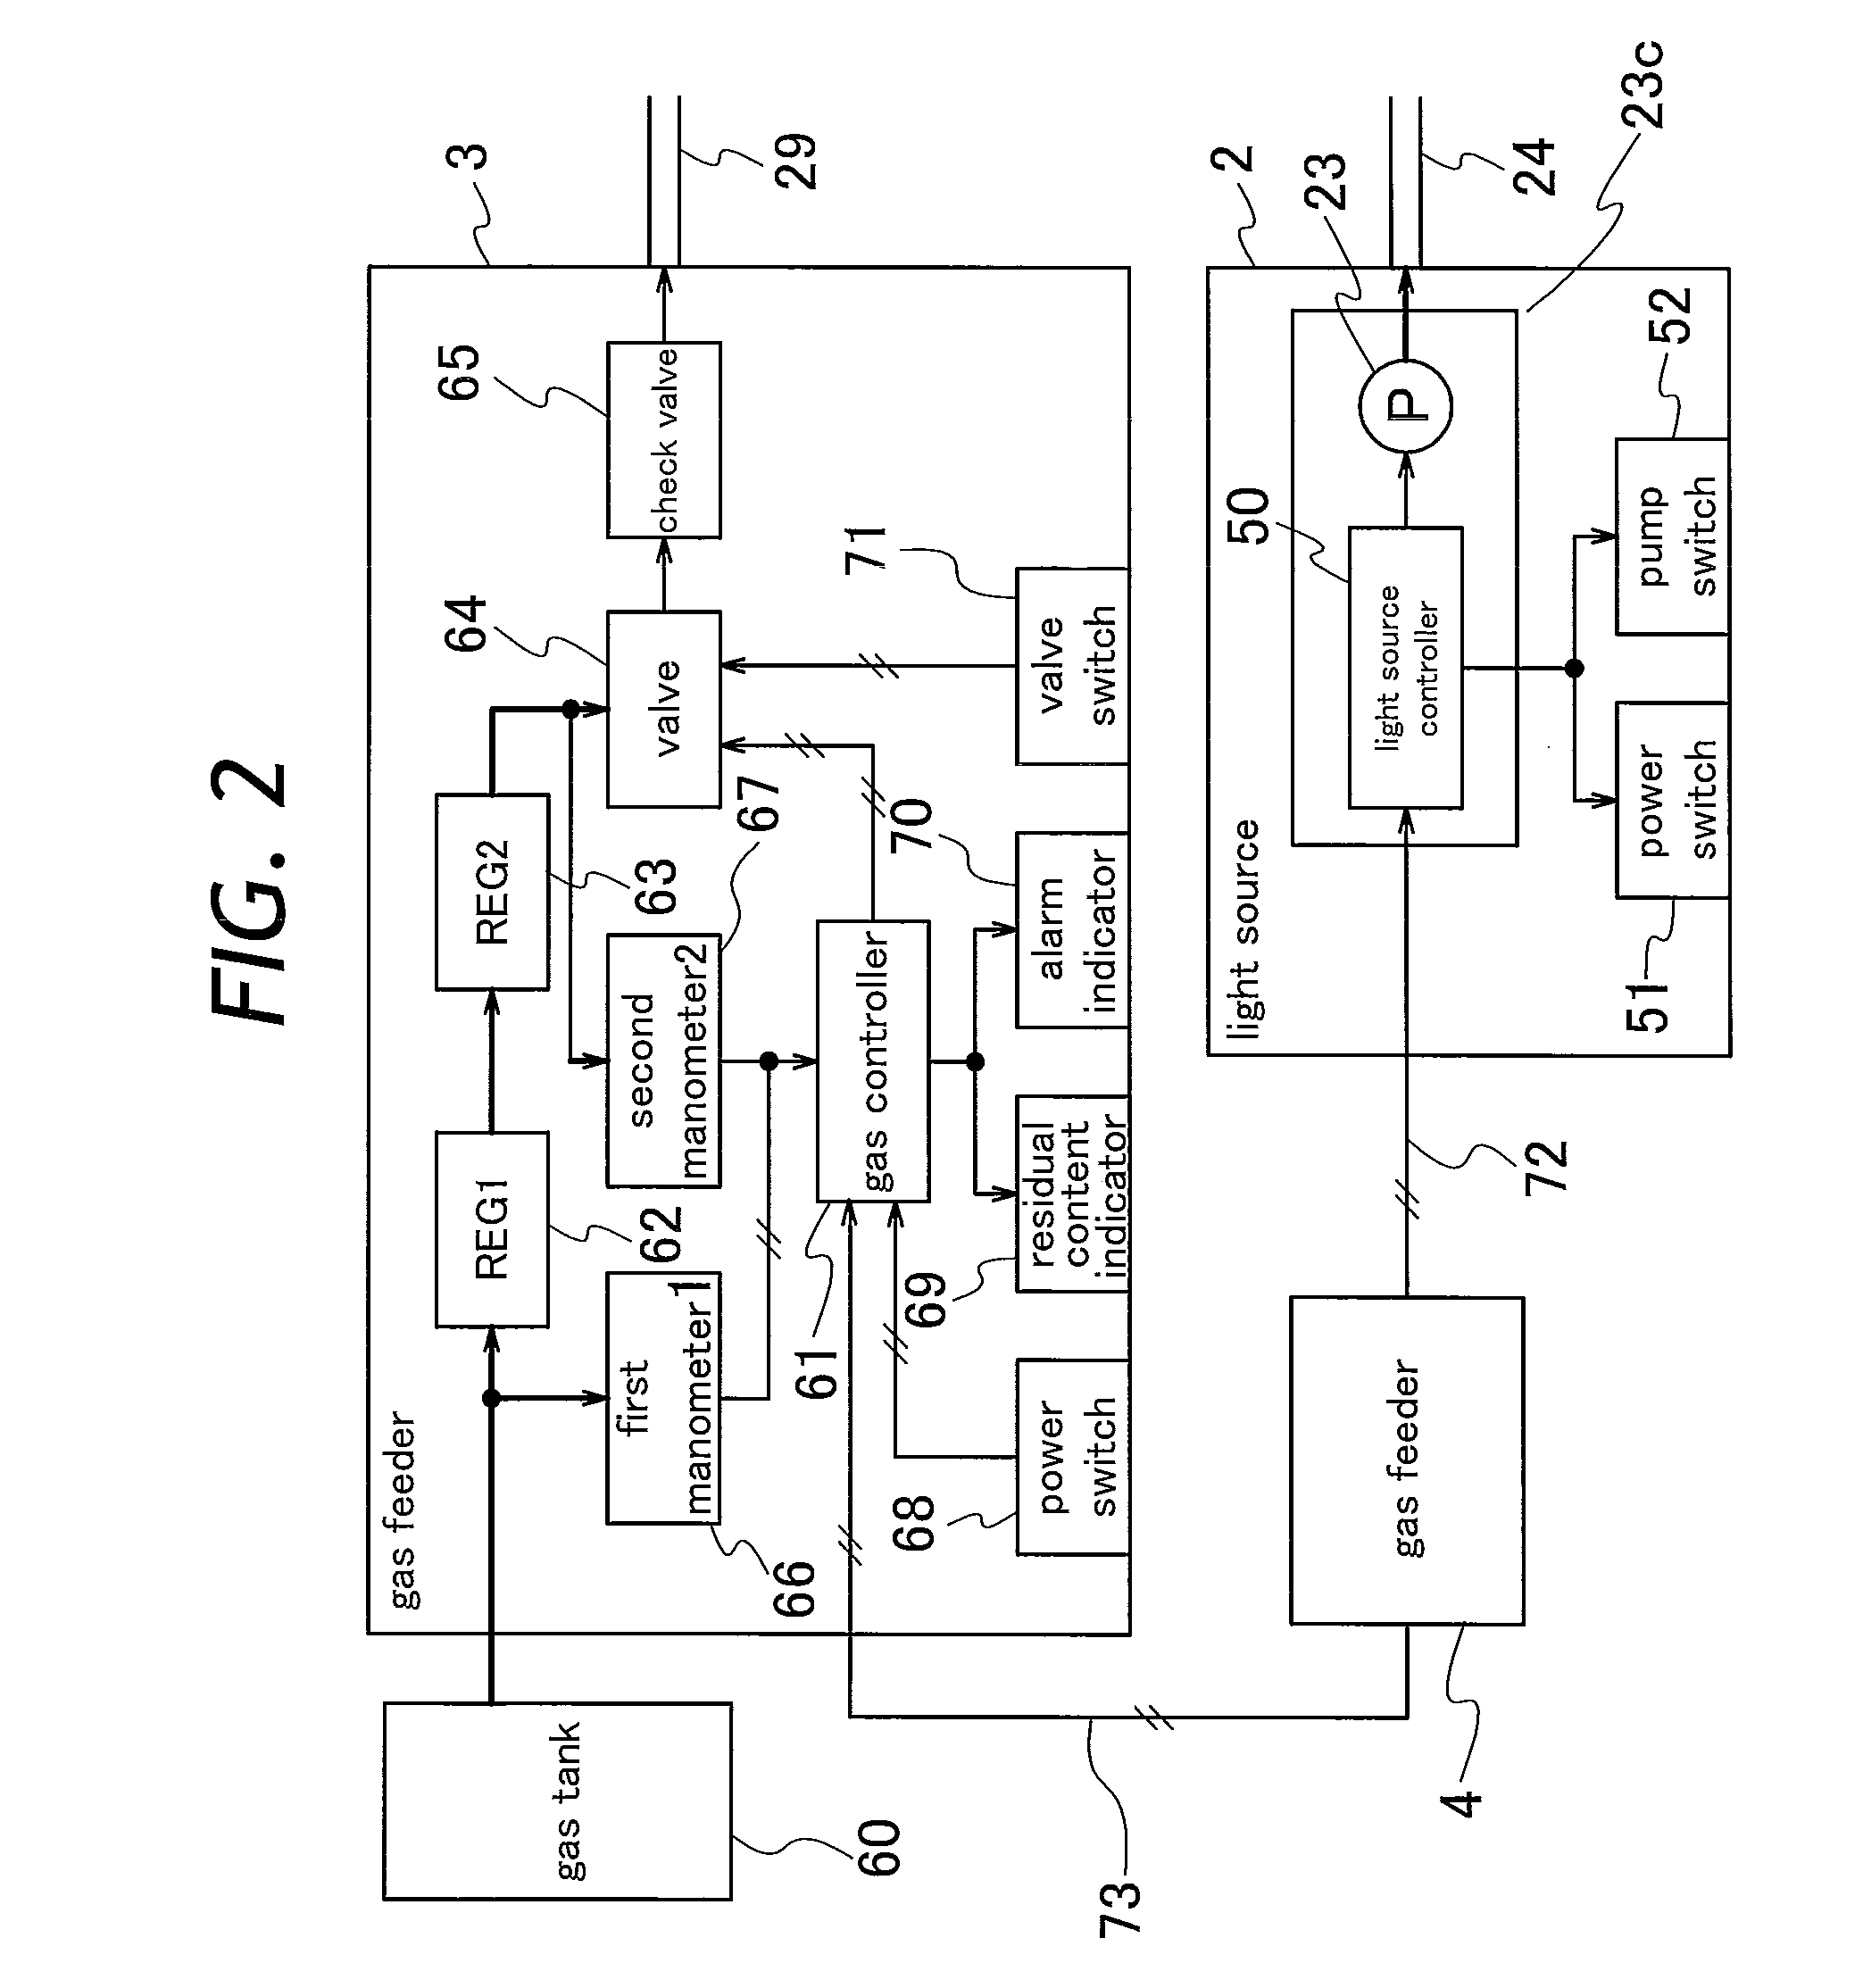 Endoscopic gaseous material feed system